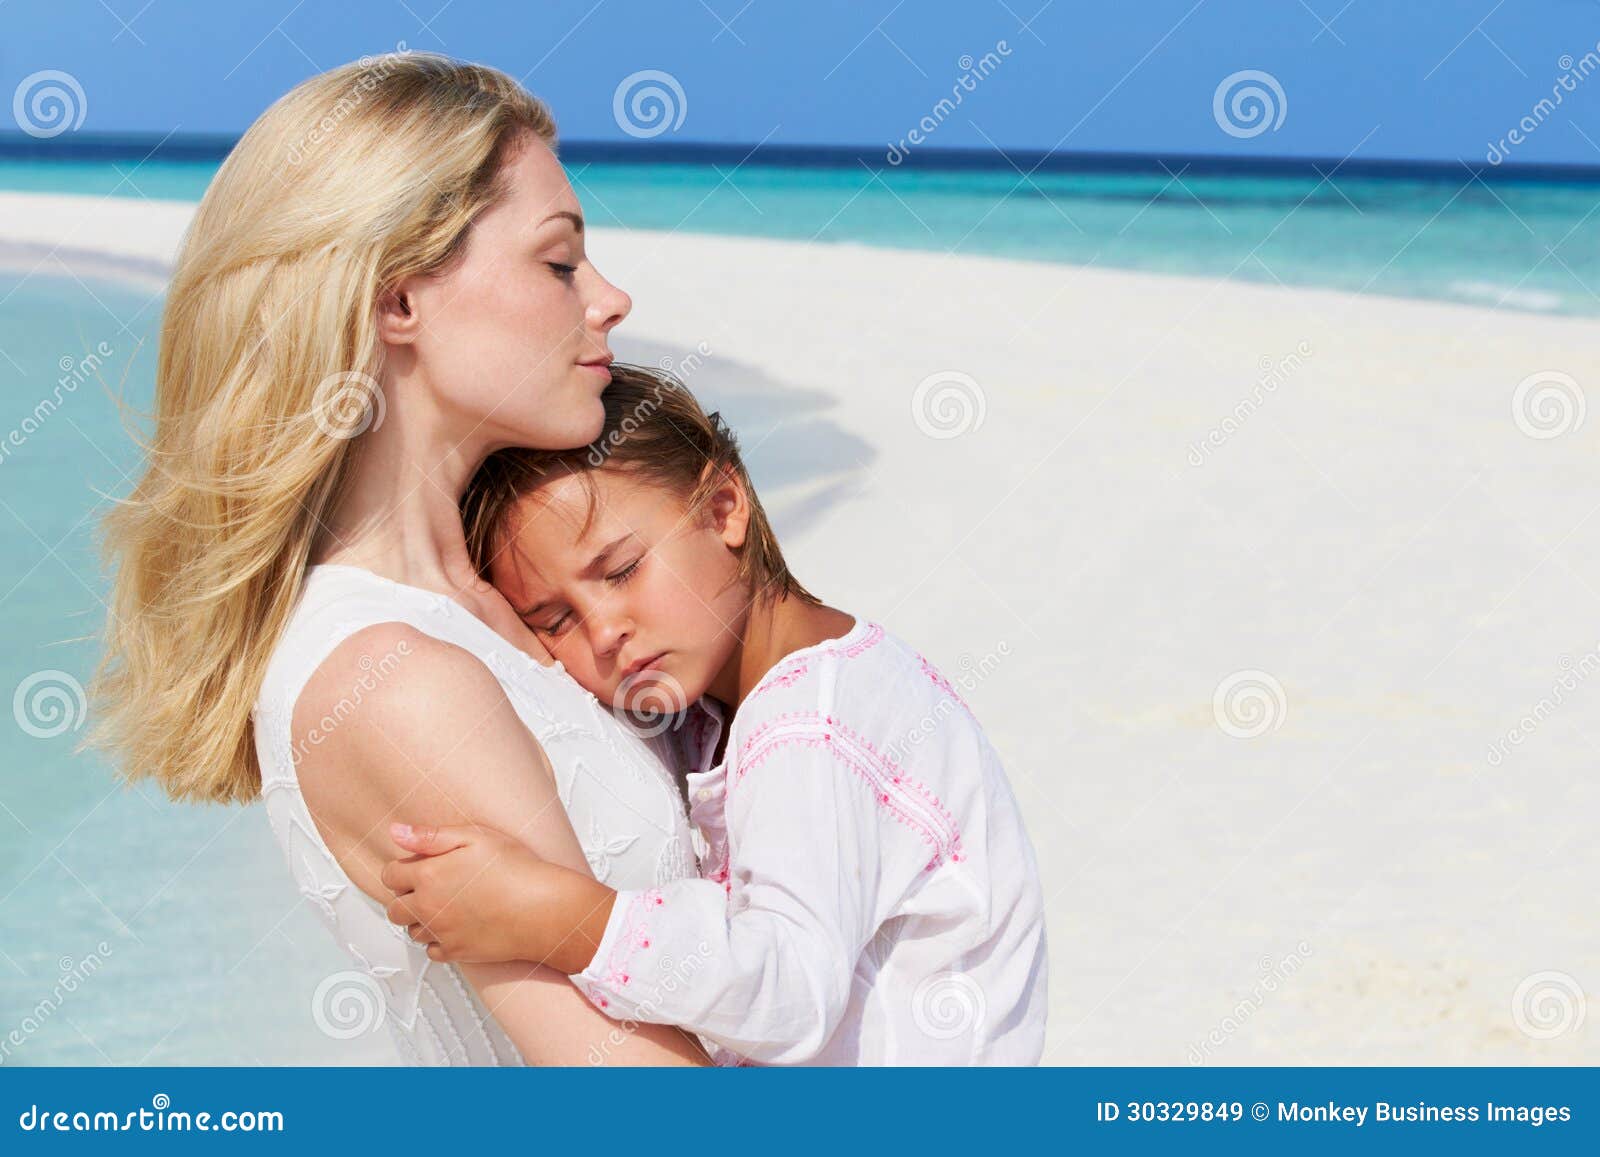 Mother And Daughter Hugging On Beautiful Beach Stock Image Image Of Caucasian Holiday 30329849 